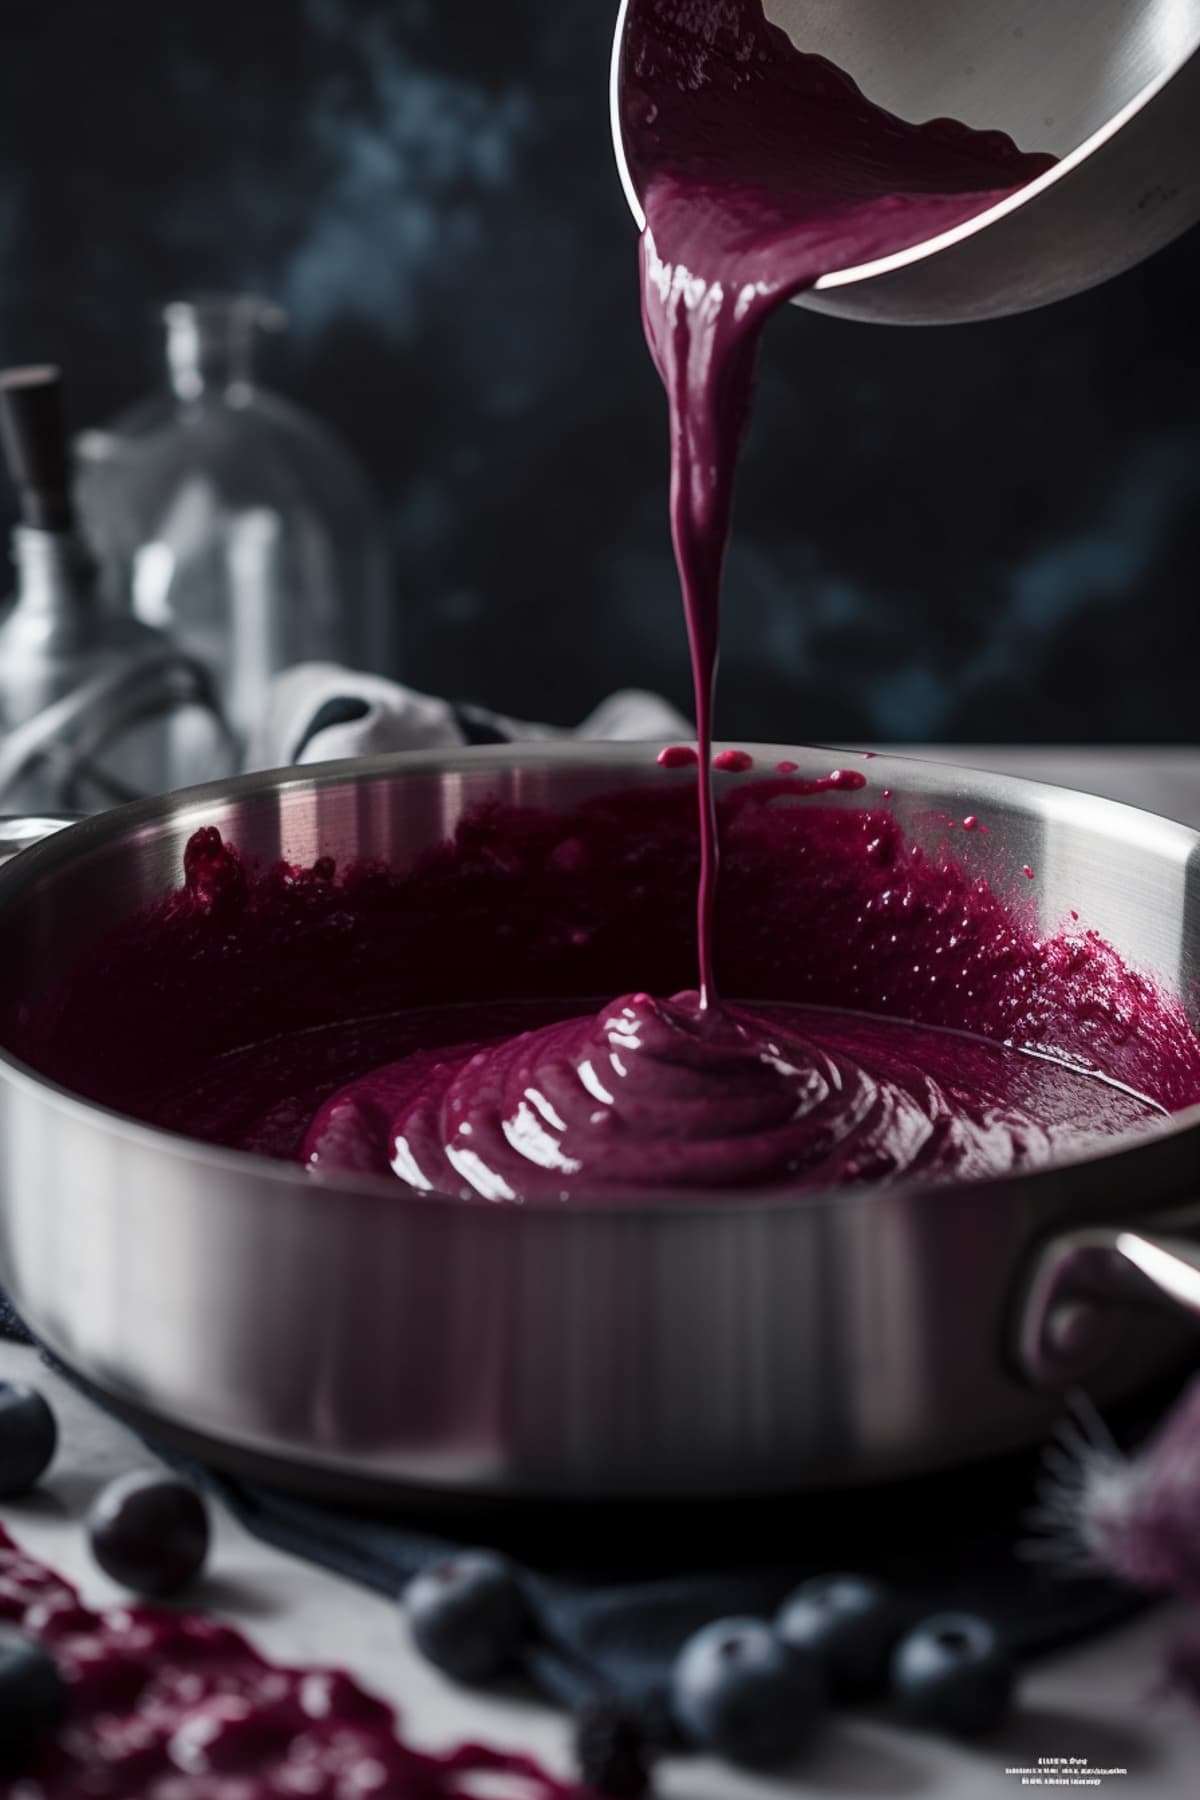 Blueberry puree being added to eggs and butter for curd.